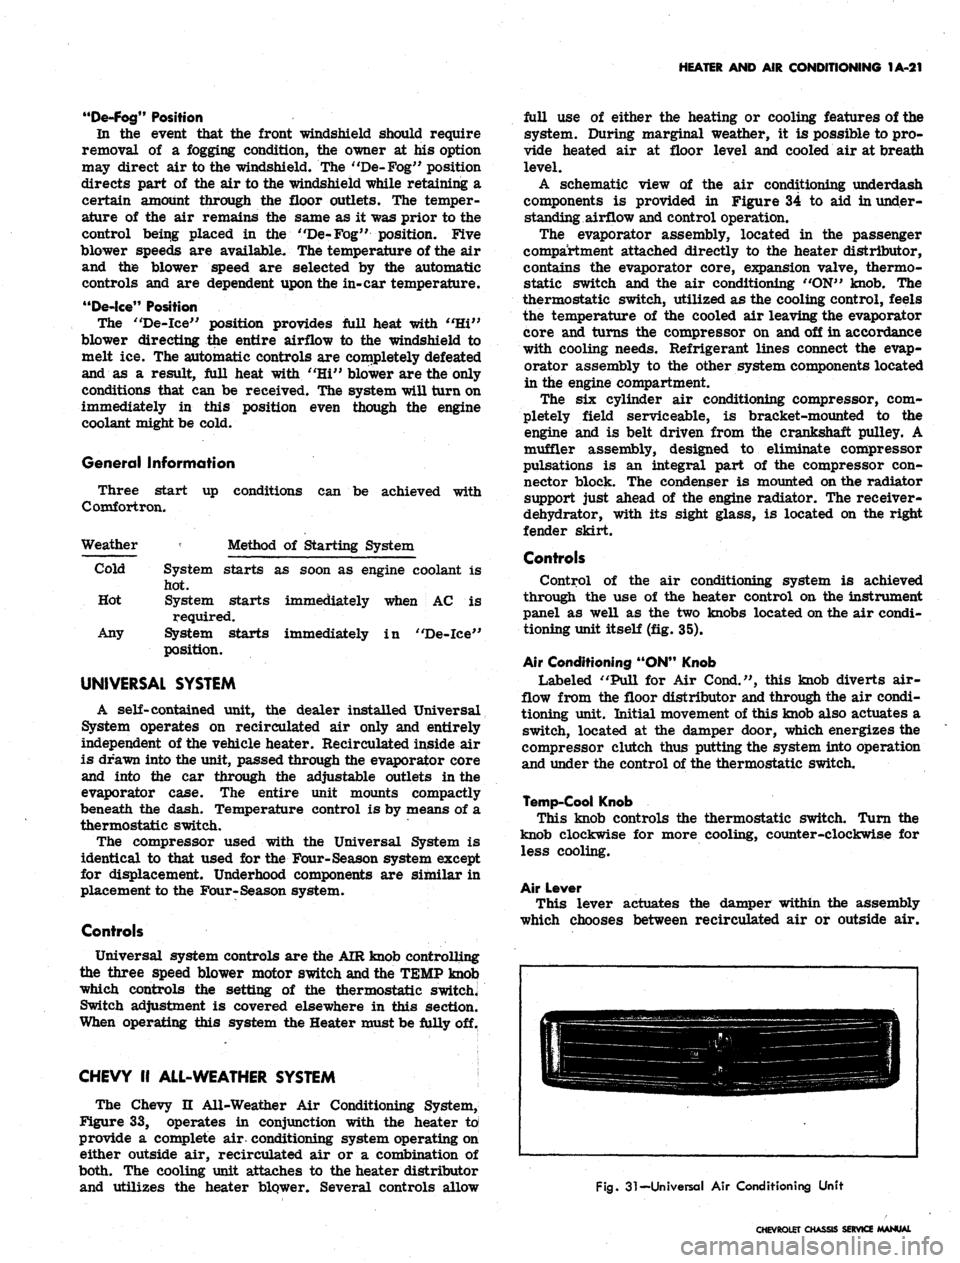 CHEVROLET CAMARO 1967 1.G Chassis Service Manual 
HEATER AND AIR CONDITIONING 1A-21

"De-Fog"
 Position

In the event that the front windshield should require

removal of a fogging condition, the owner at his option

may direct air to the windshield